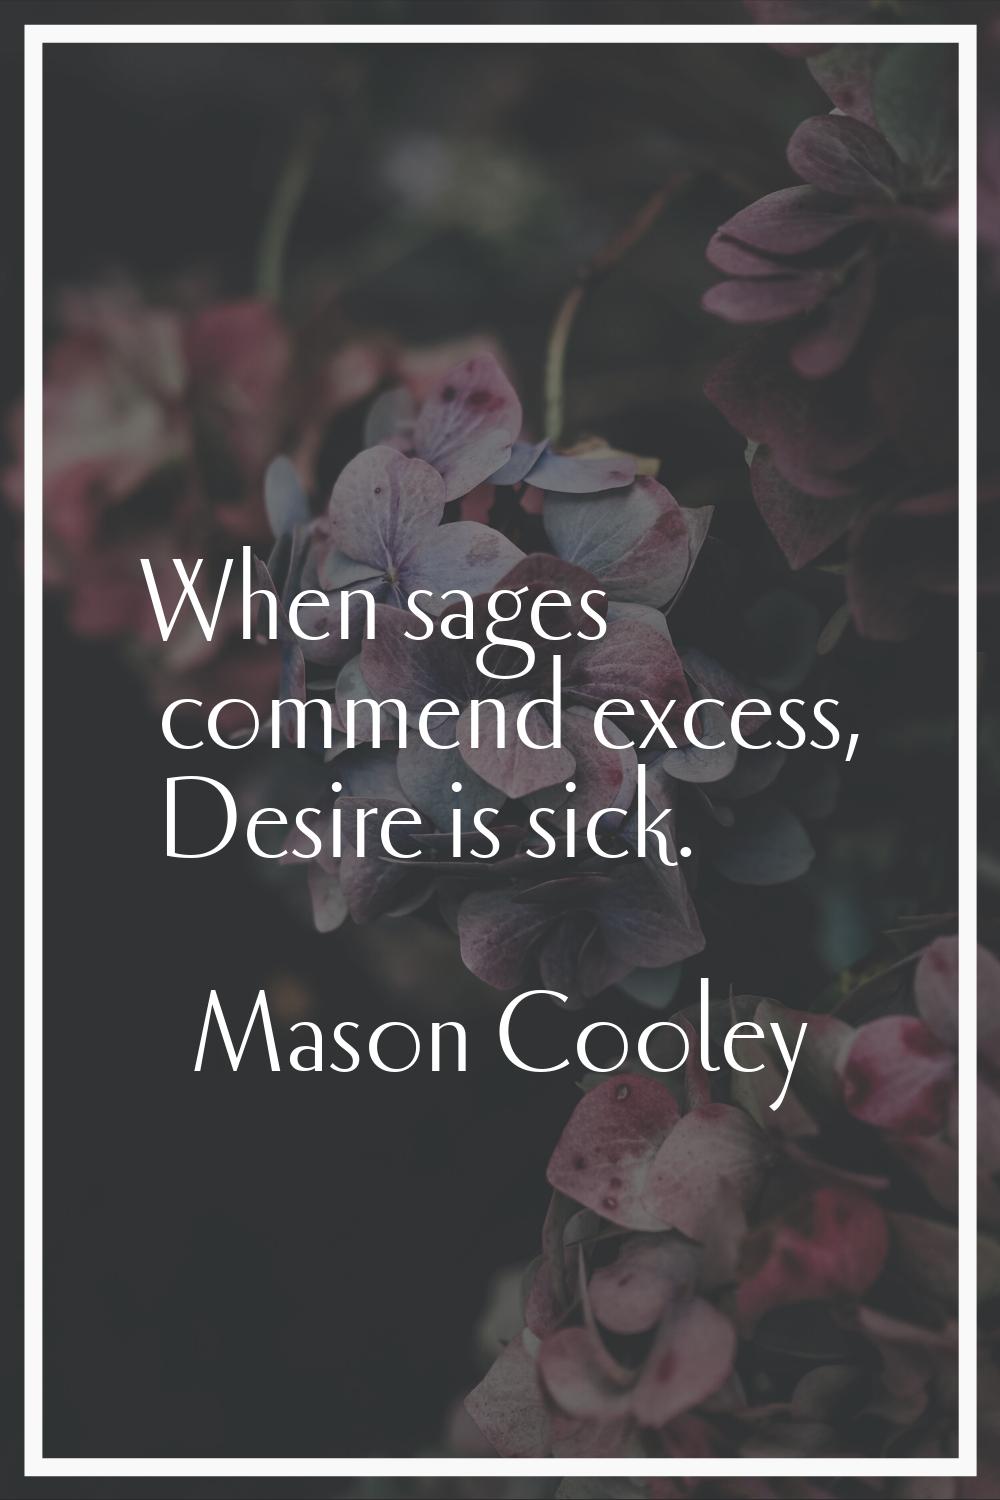 When sages commend excess, Desire is sick.